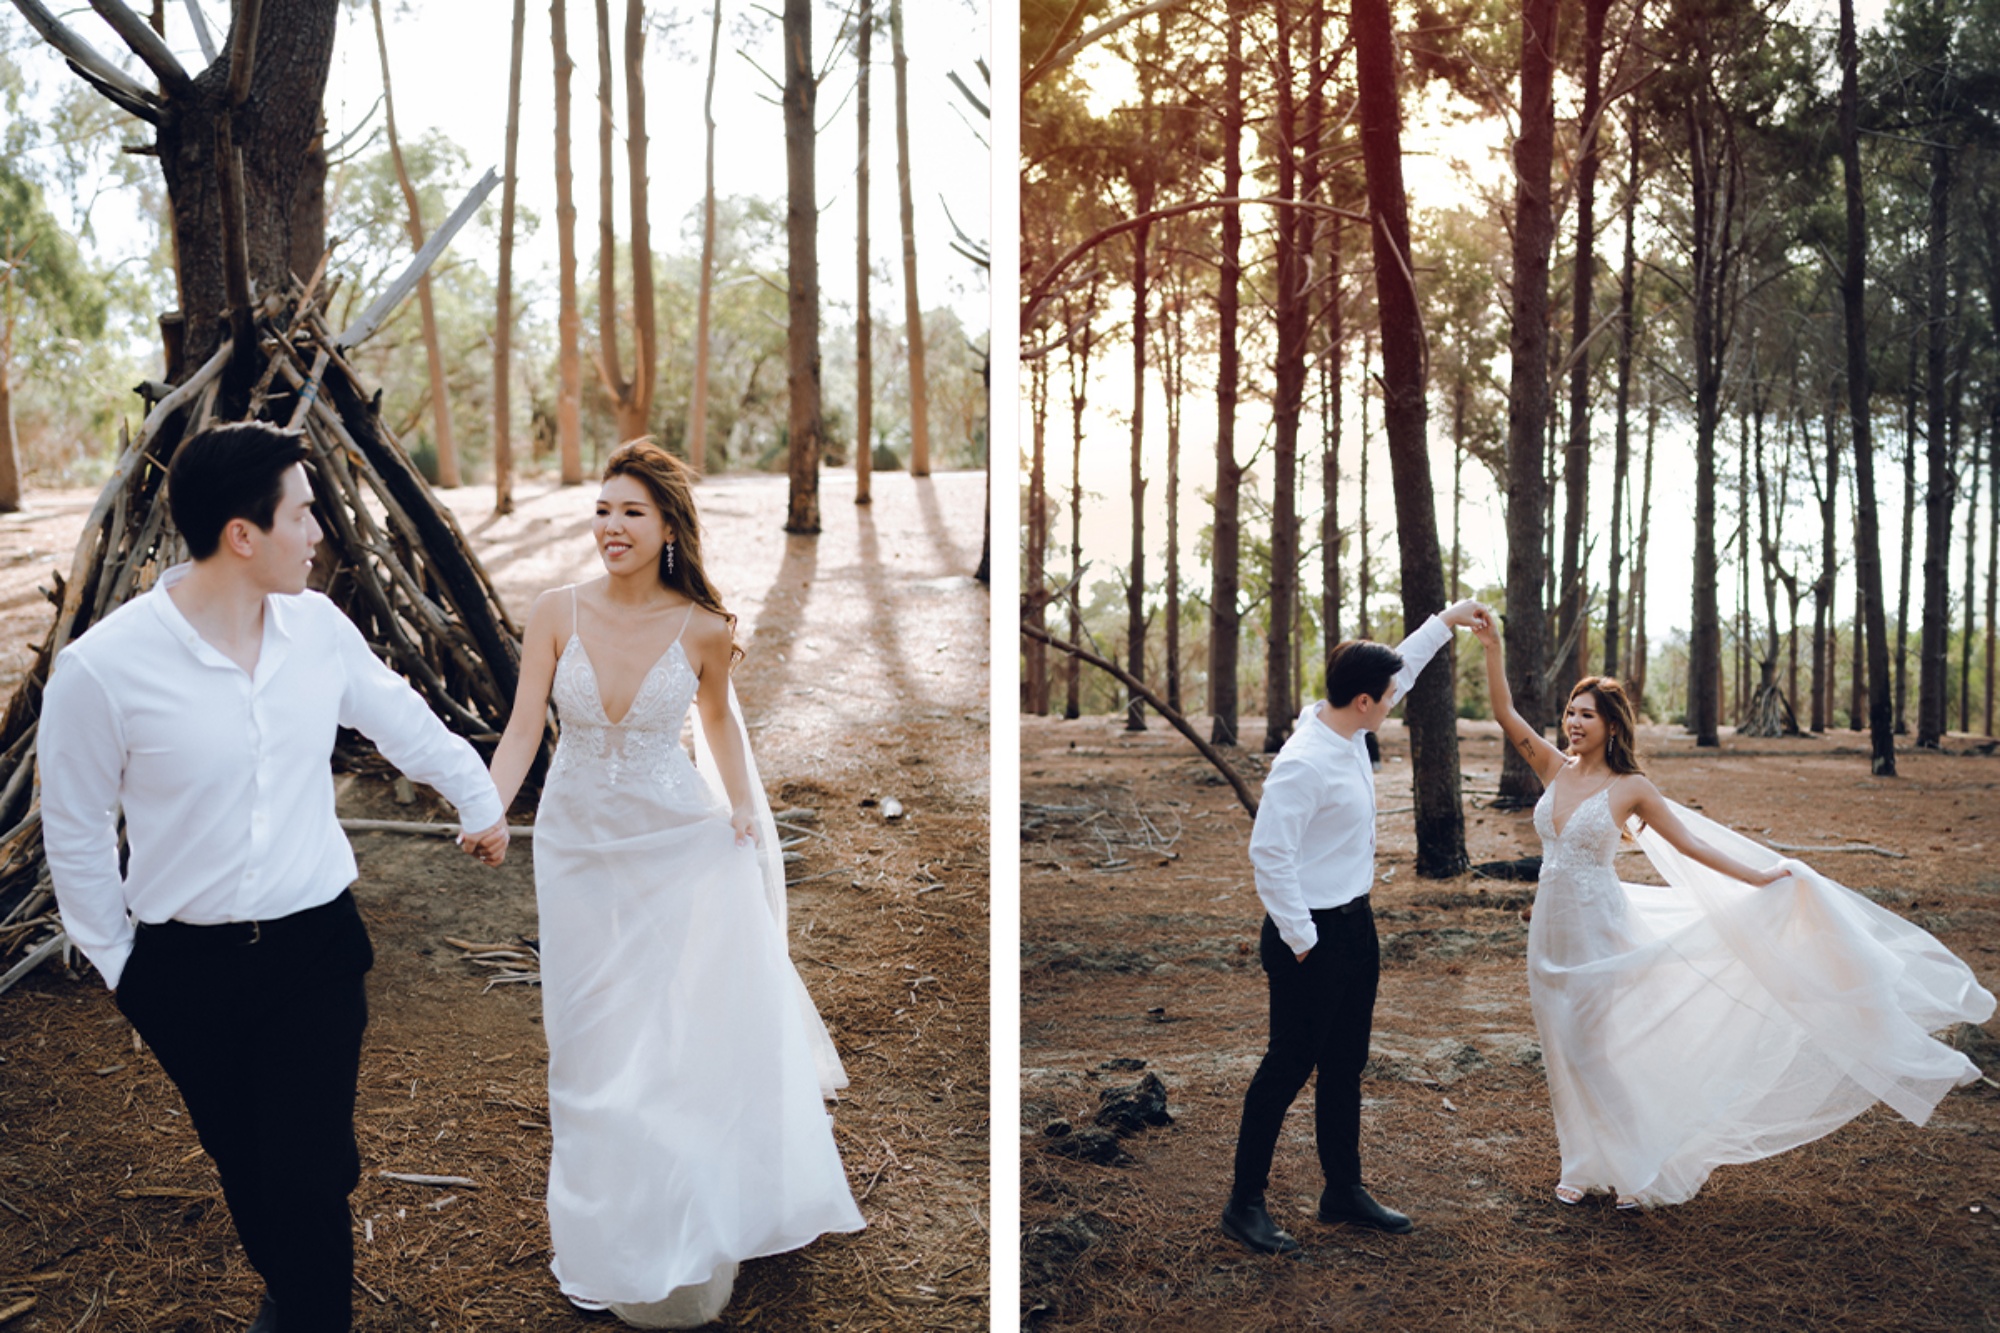 Capturing Forever in Perth: Jasmine & Kamui's Pre-Wedding Story by Jimmy on OneThreeOneFour 4